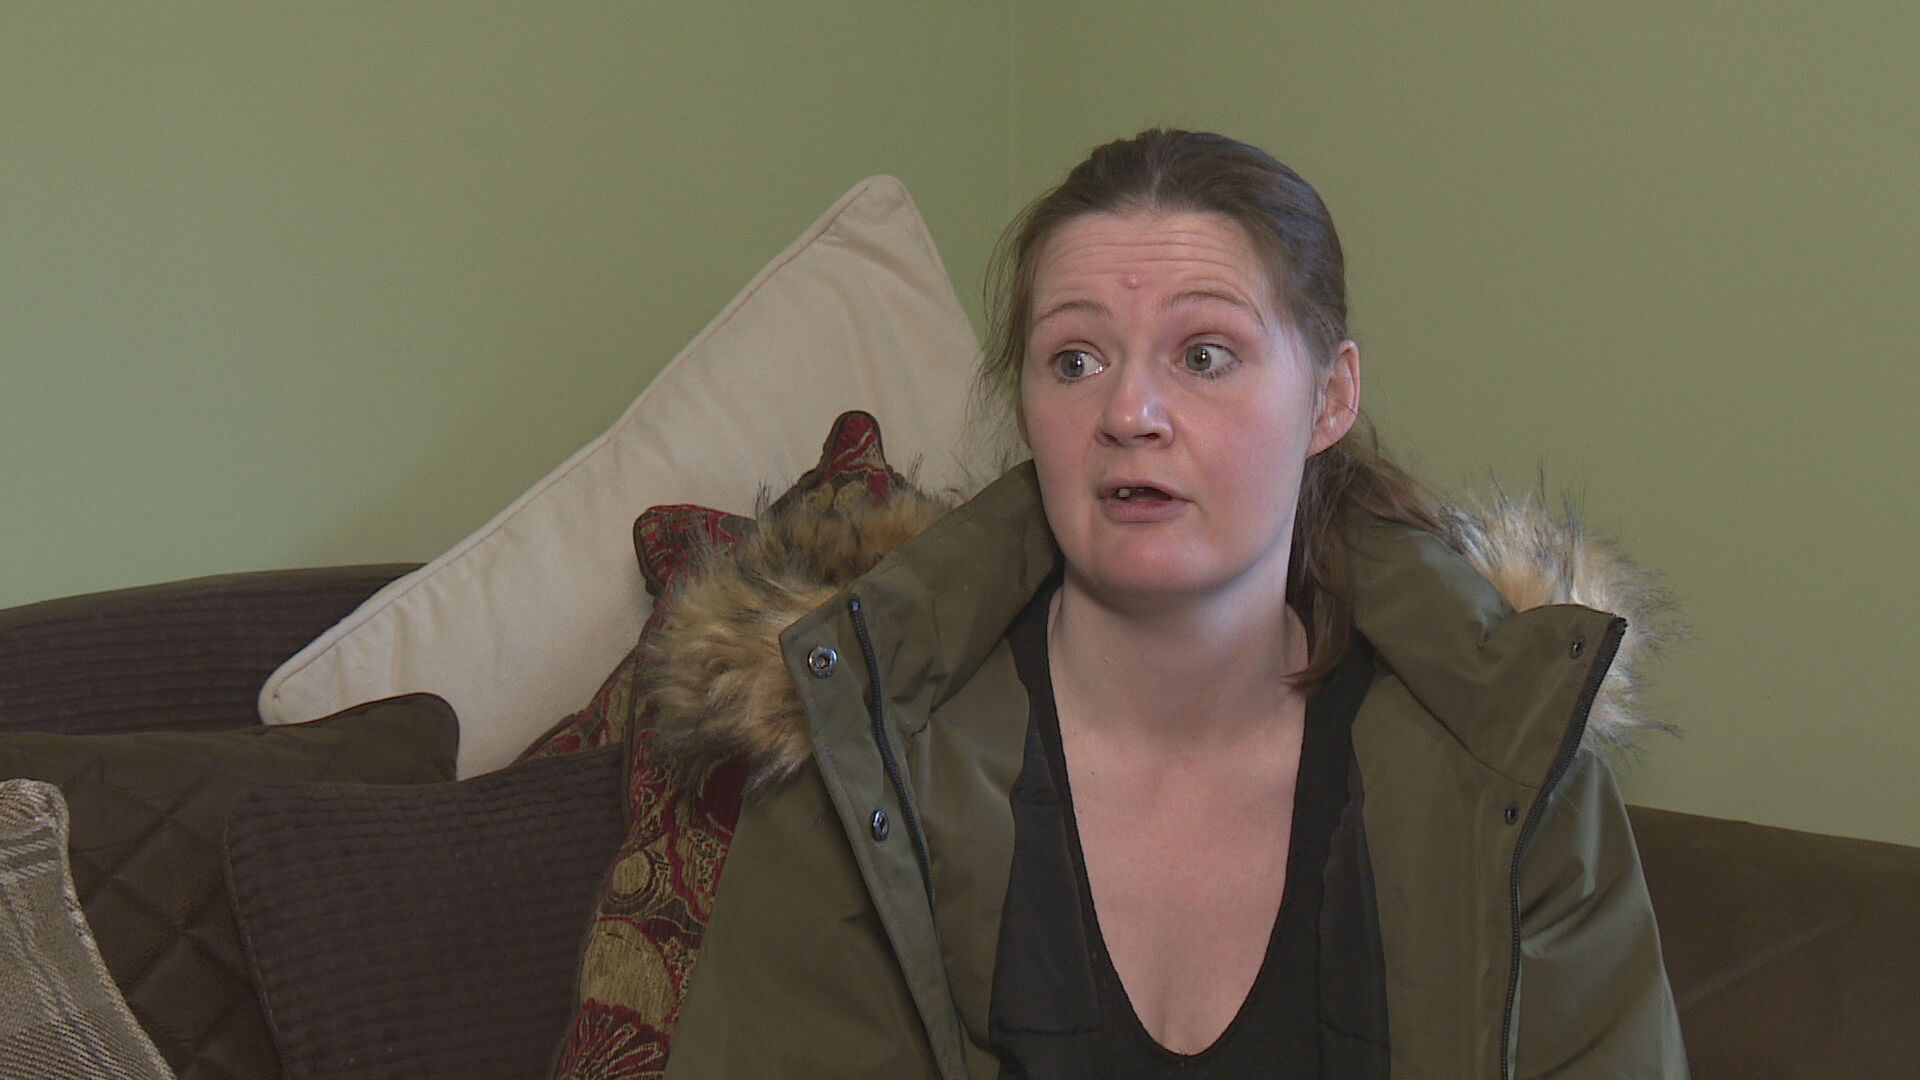 Stephanie Fox hasn't used drugs since moving into the home in December.